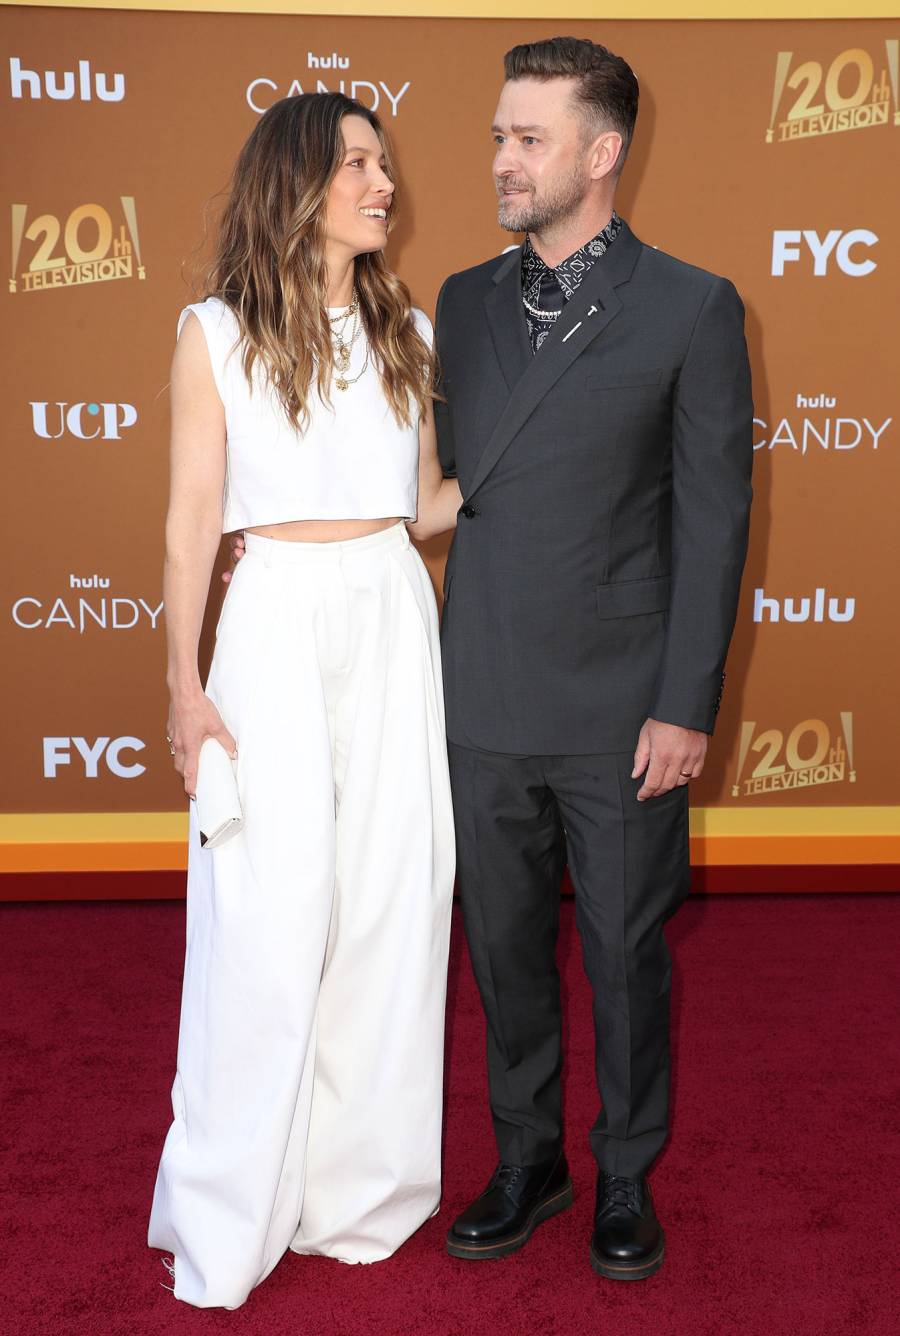 Jessica Biel and Justin Timberlake Have Red Carpet Date Night at Candy Premiere 2